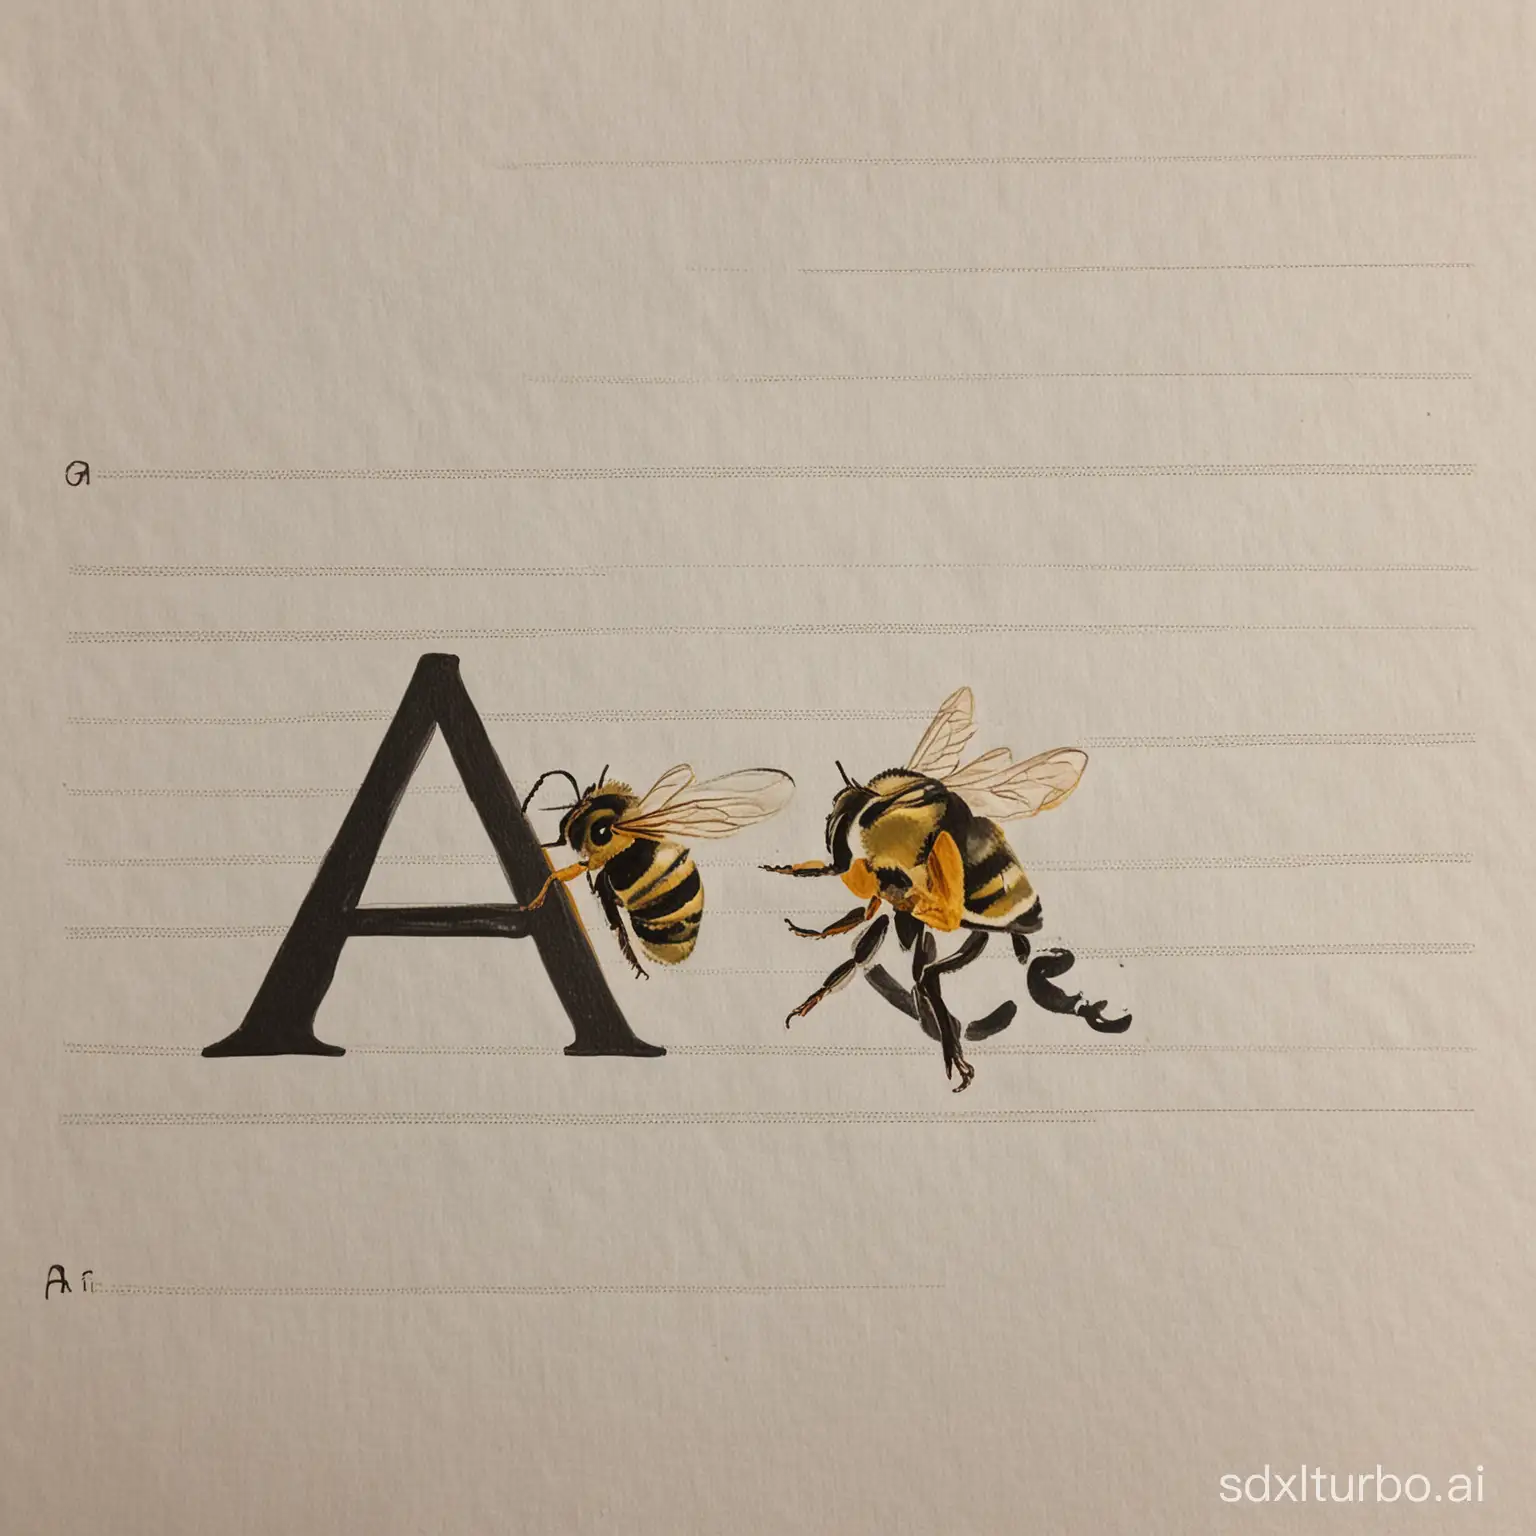 Bee-with-Letter-A-on-a-Still-Surface